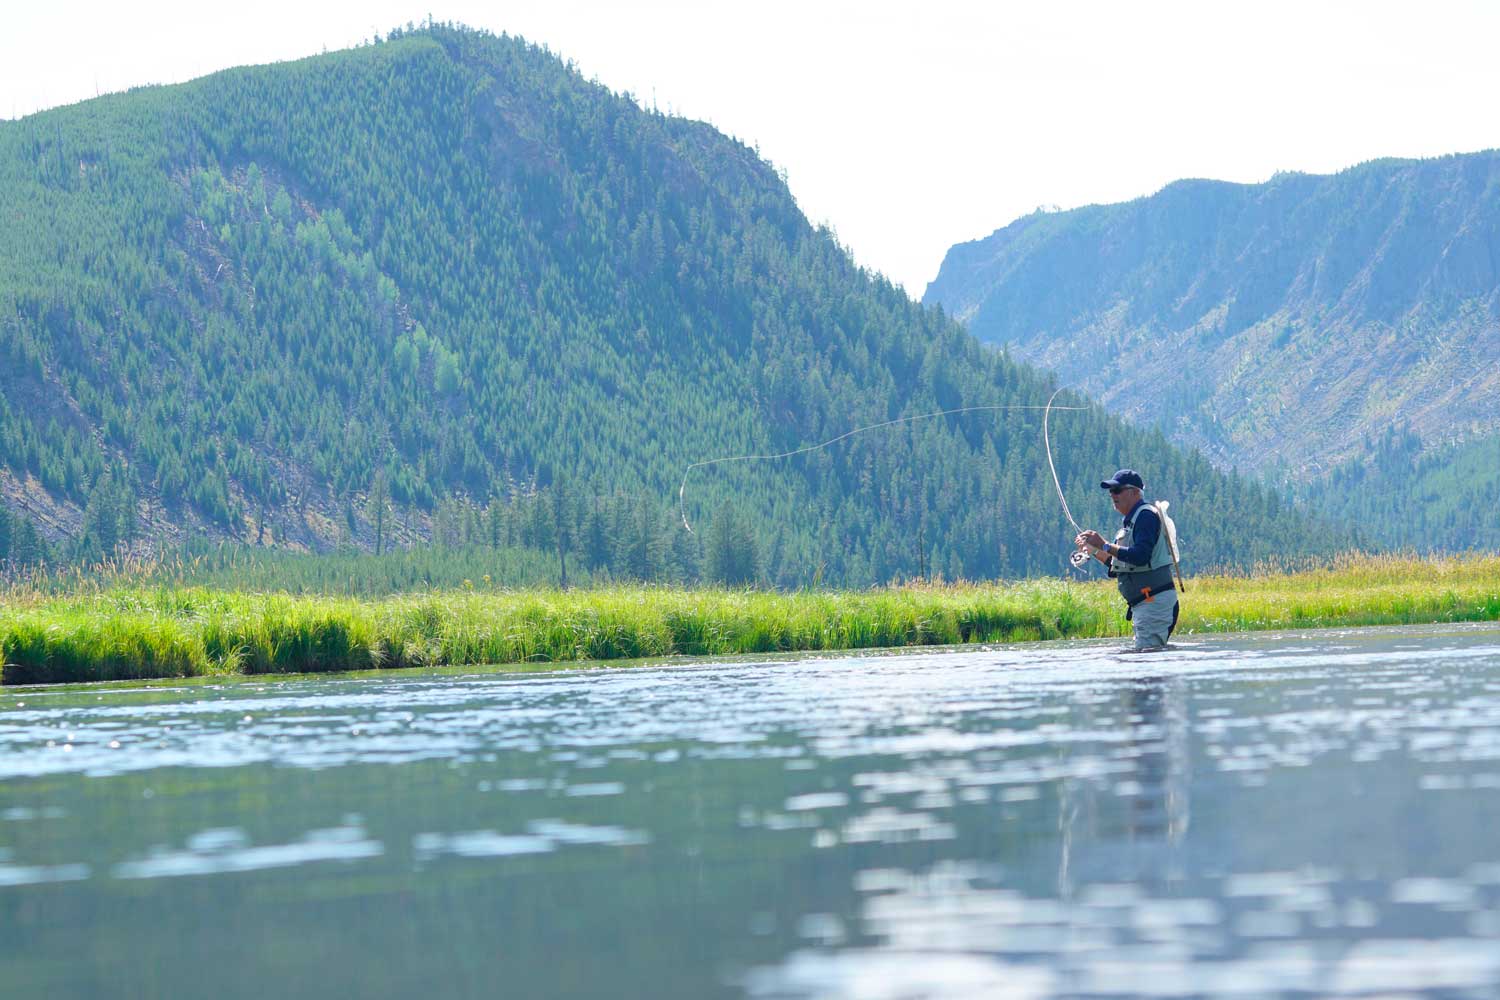 The Best Things To Do In Bozeman In The Summer - Flyfishing the Madison River